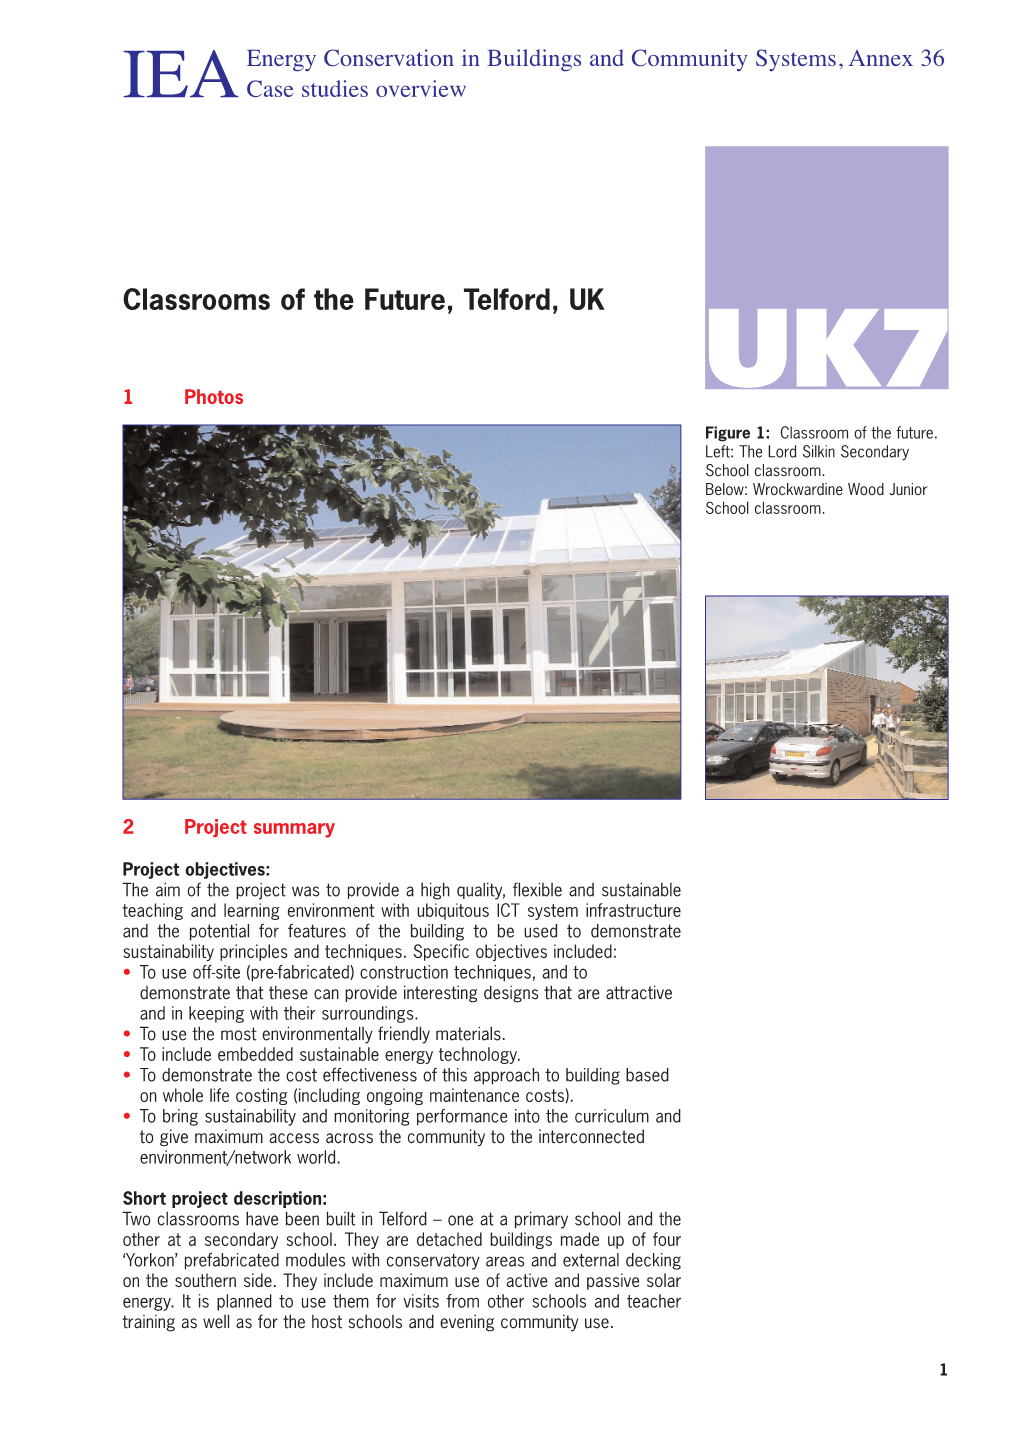 Classrooms of the Future, Telford, UK